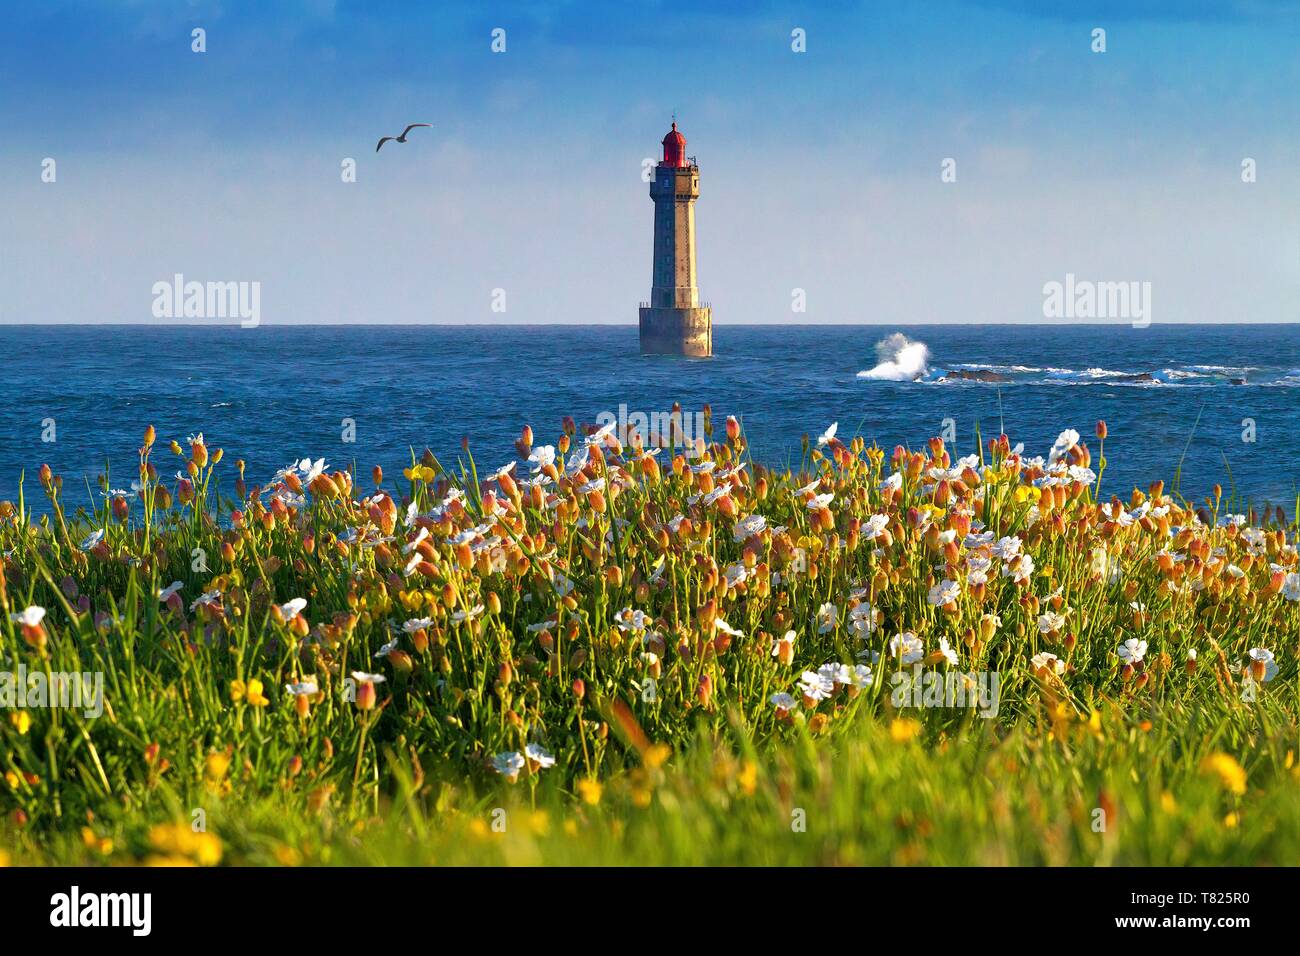 France, Finistere, Ponant islands, The Regional Natural Park of Armorica, Iroise Sea, Ouessant Island, Biosphere Reserve (UNESCO), La Jument Lightouse in Spring Stock Photo